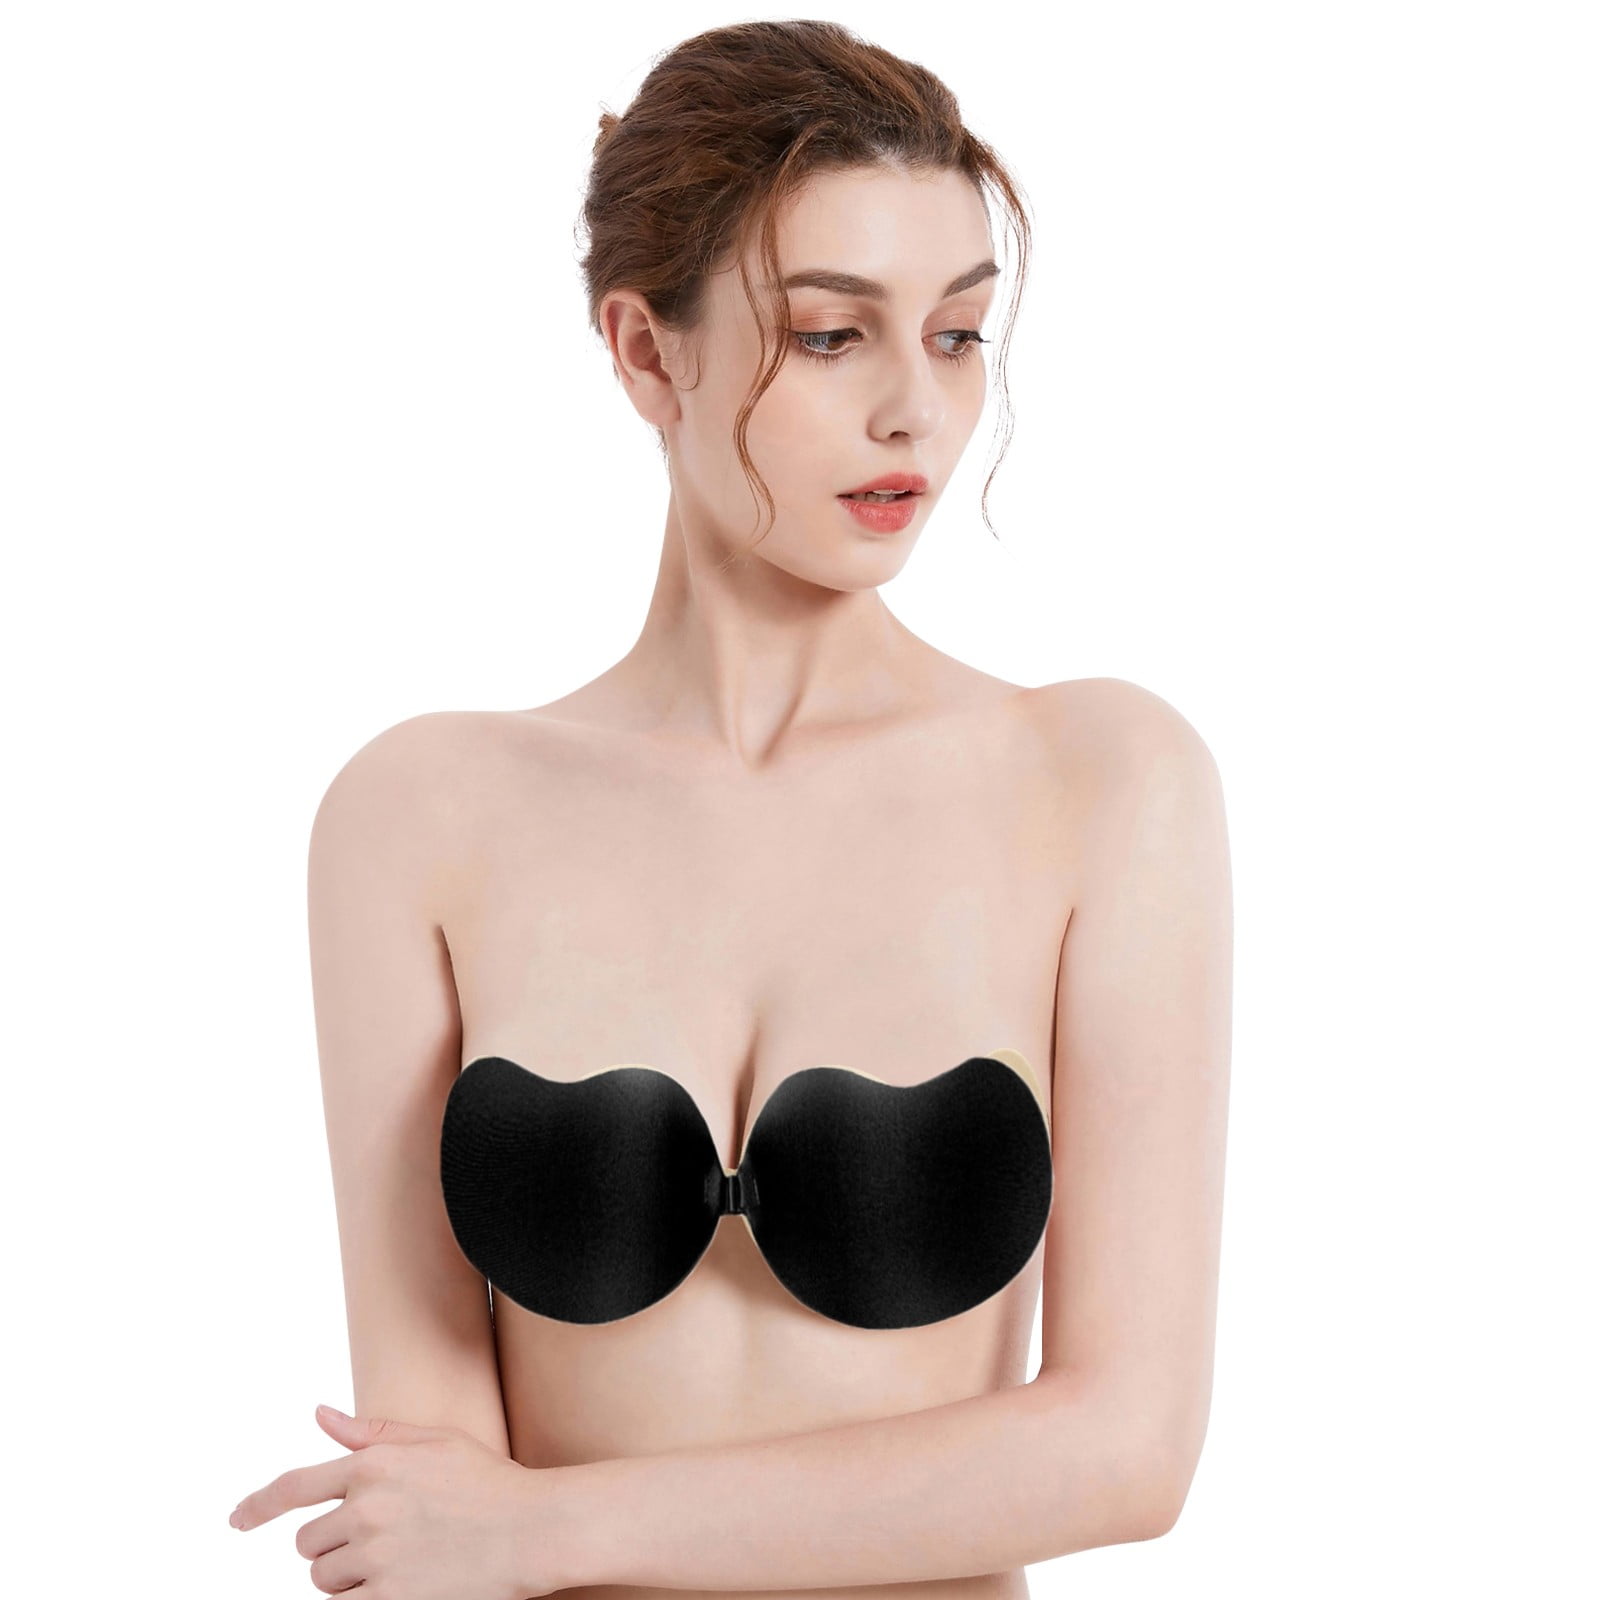 Niidor Women's Reusable Sticky Bra Push-up Invisible Lace Black Adhesive Bra  with Silicone Nipple Cover 